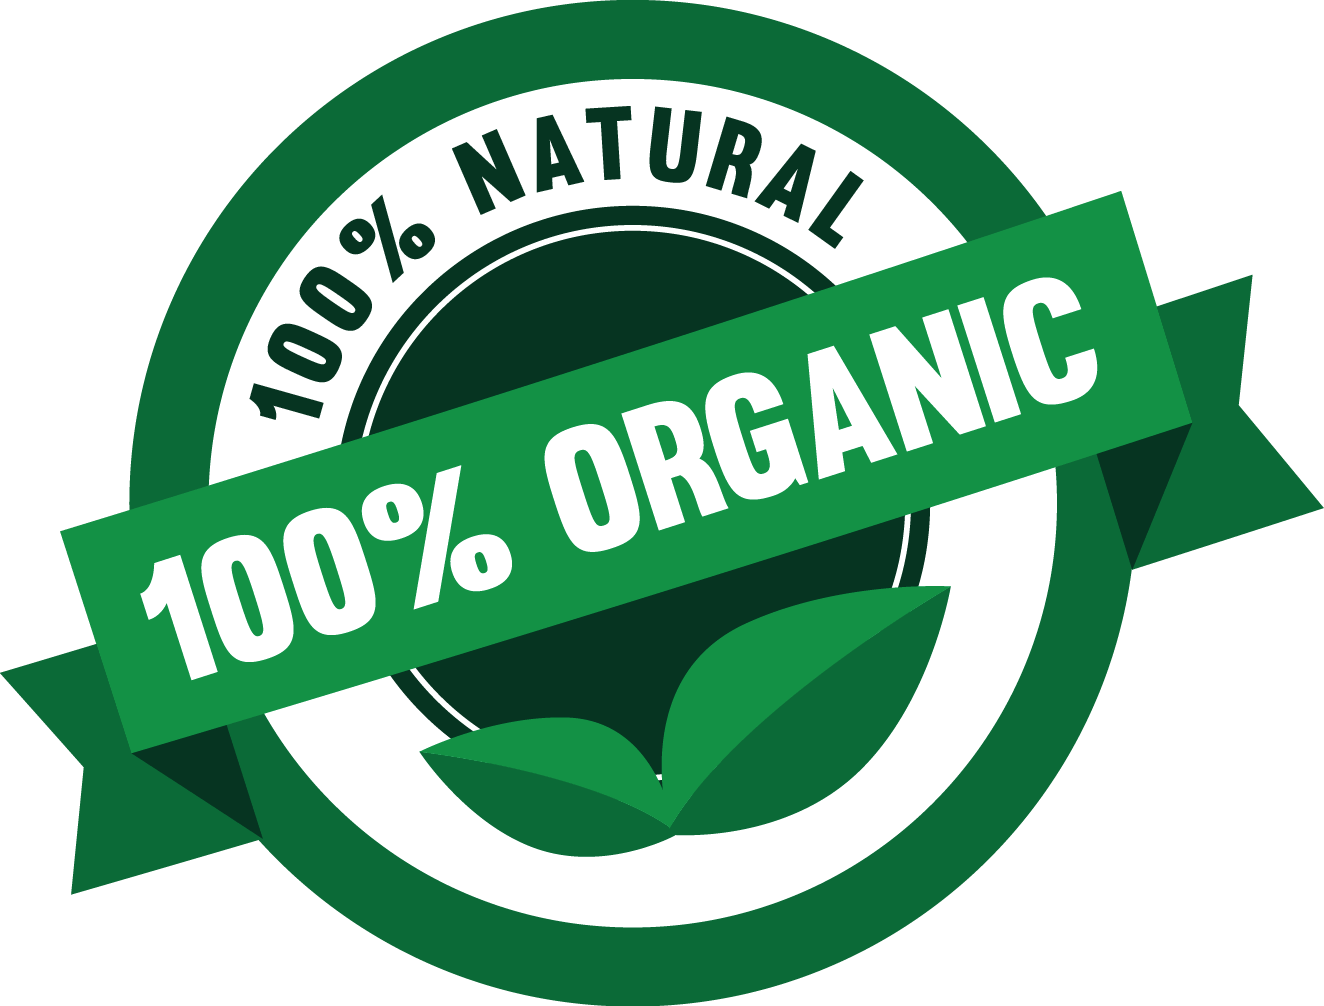 Download Final Vacuum 100 Organic Logo Png Png Image With No Background Pngkey Com